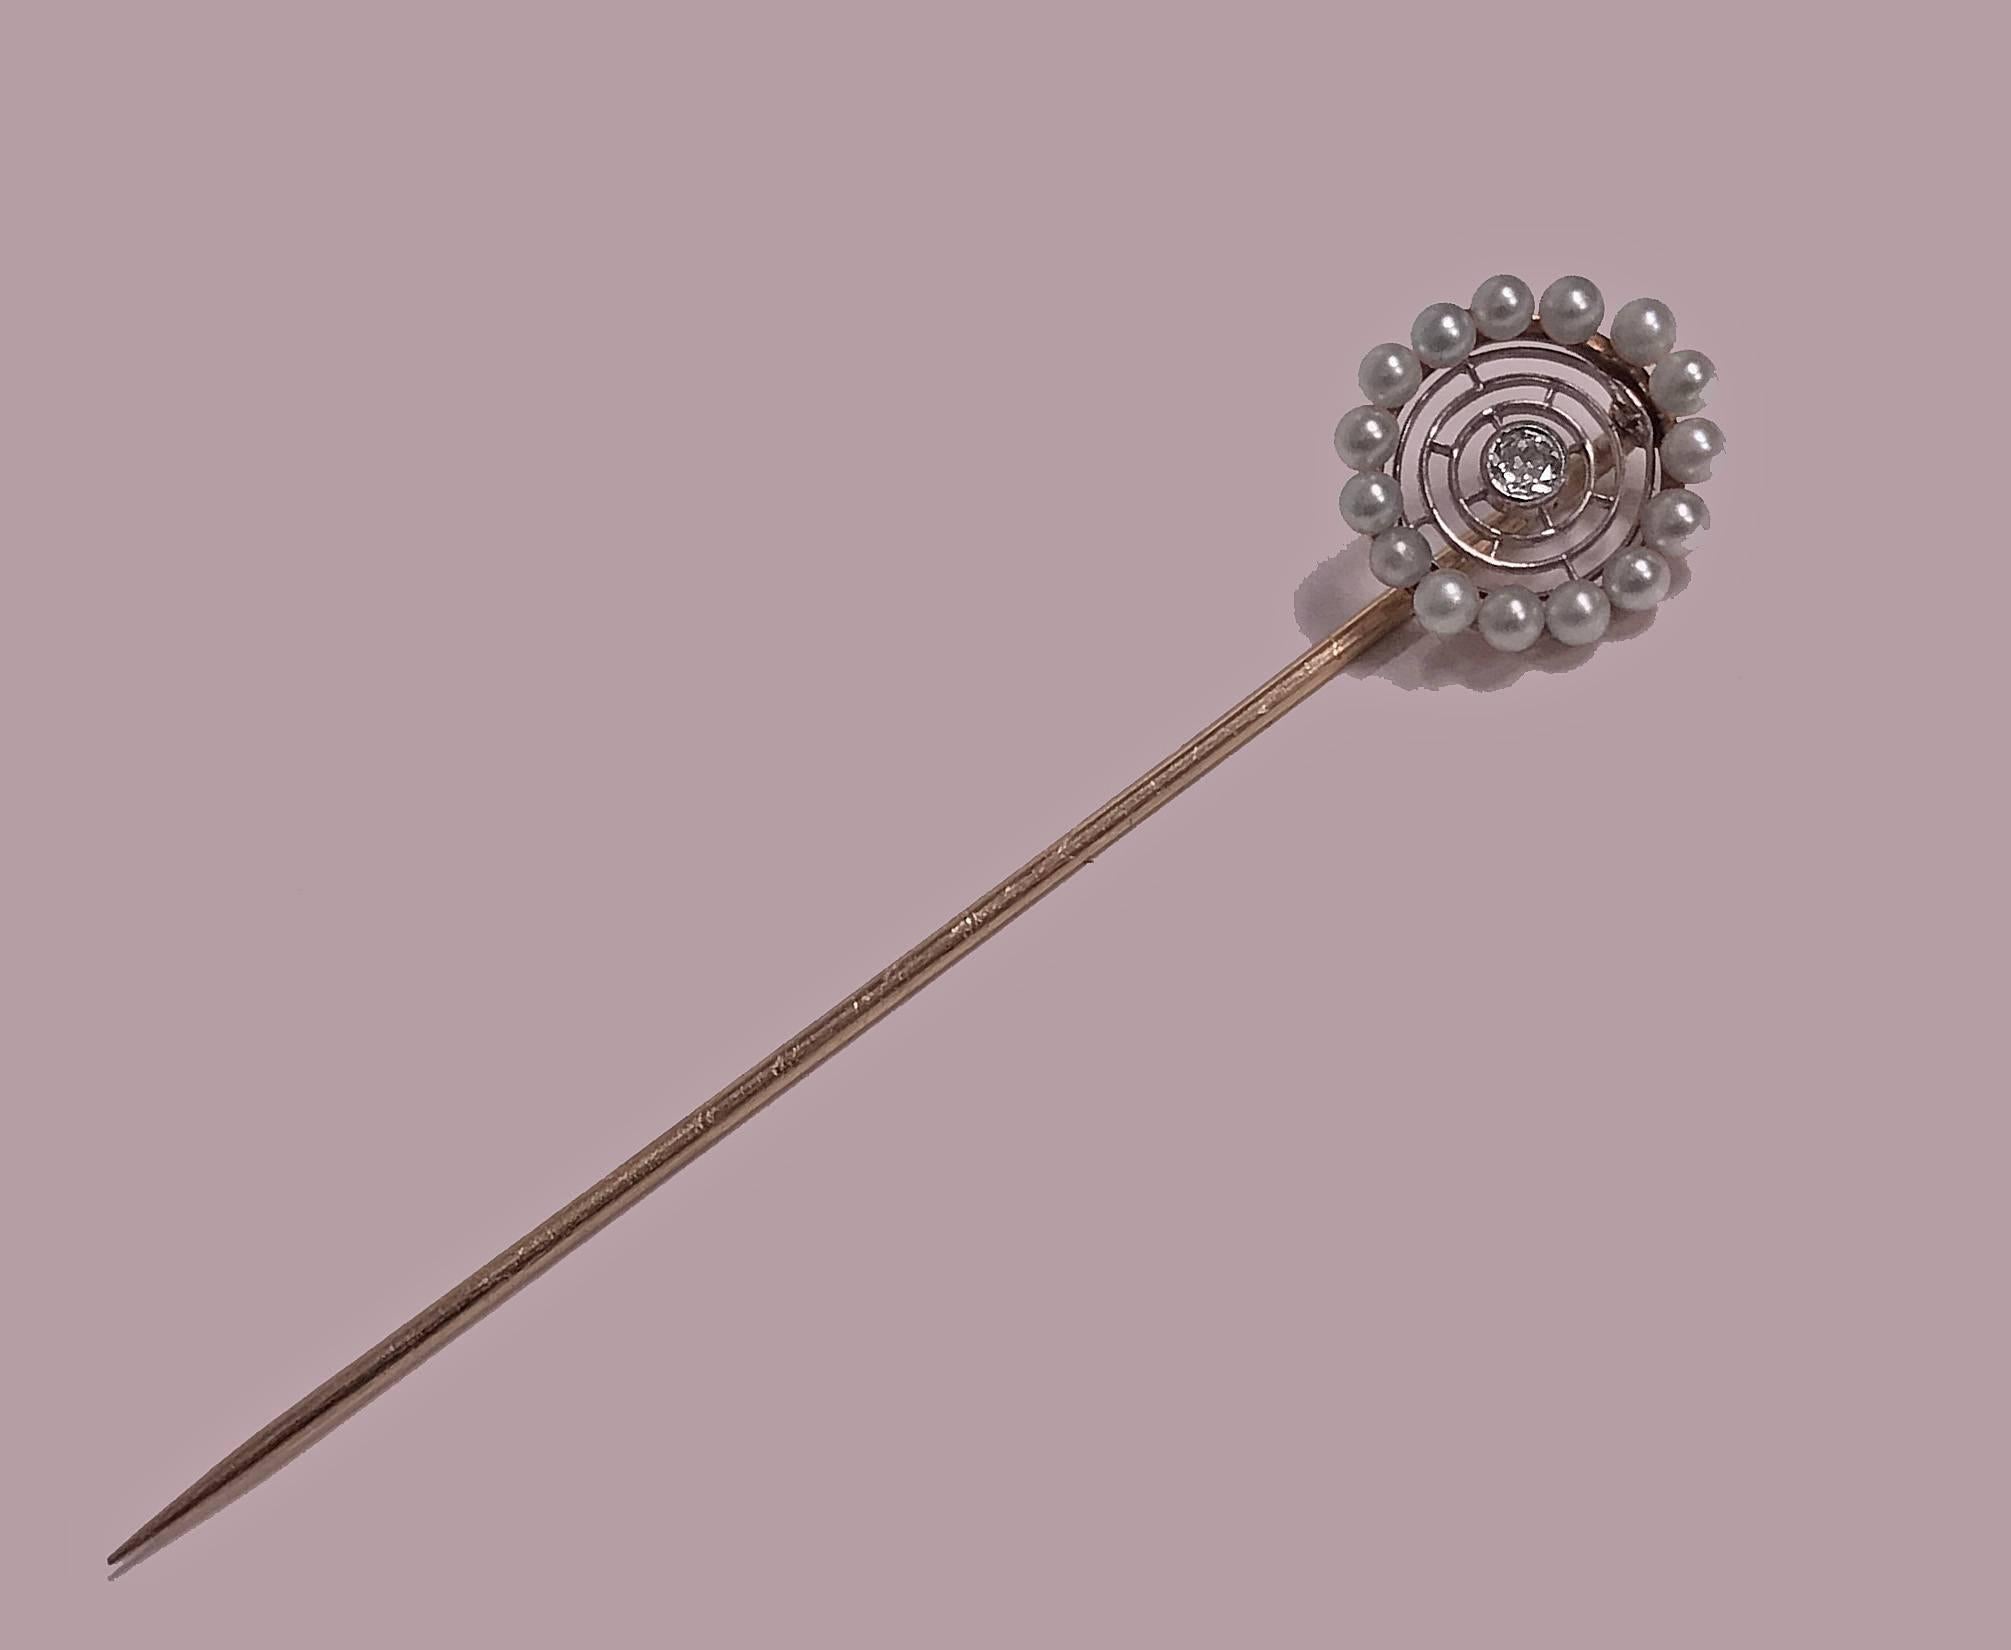 Antique Hans Brassler diamond, pearl, gold and platinum stickpin, American, circa 1900. The stickpin of a spider web design, set in the centre with an old cut diamond, approximately 0.07 carat and a surround of 15 round pearls (untested for